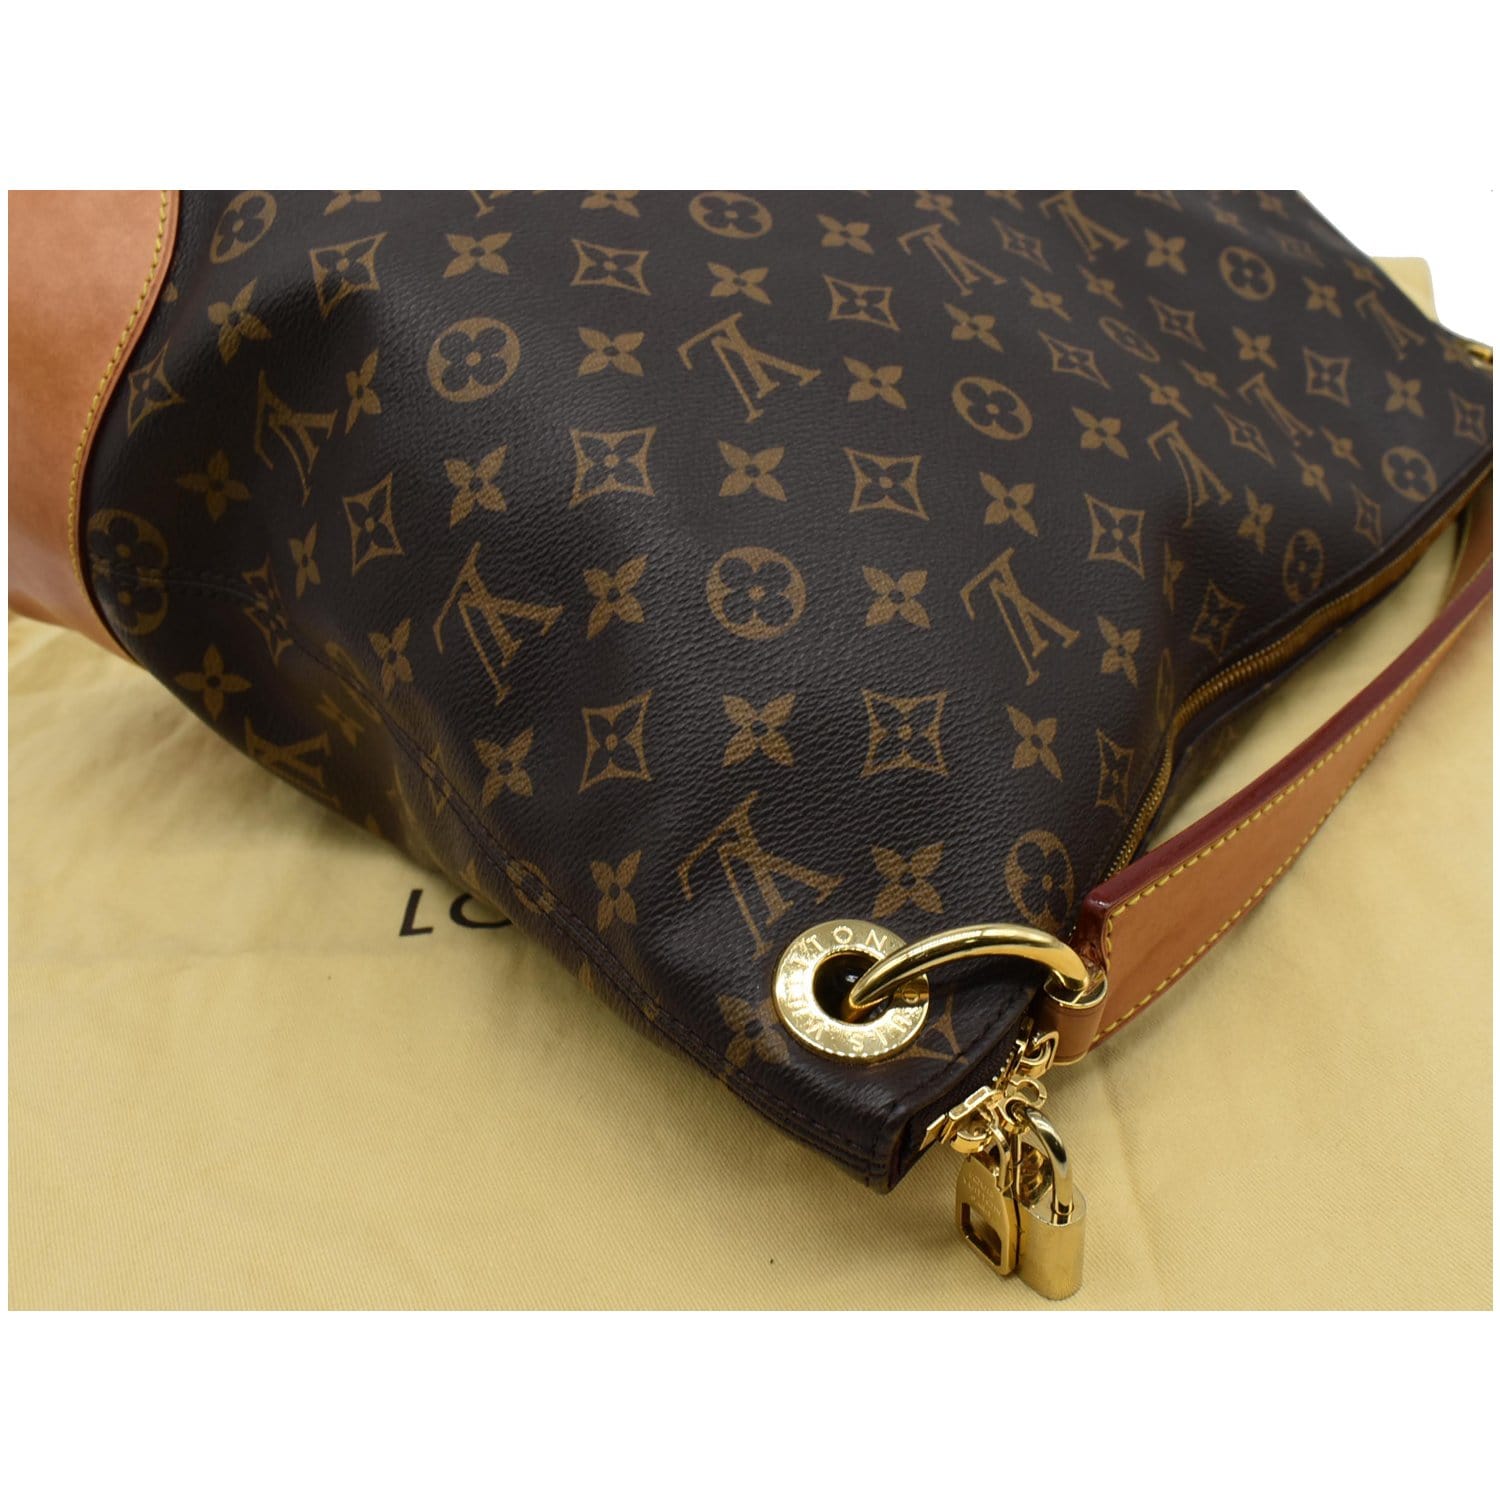 Louis Vuitton Berri MM in excellent condition and 100% Authentic